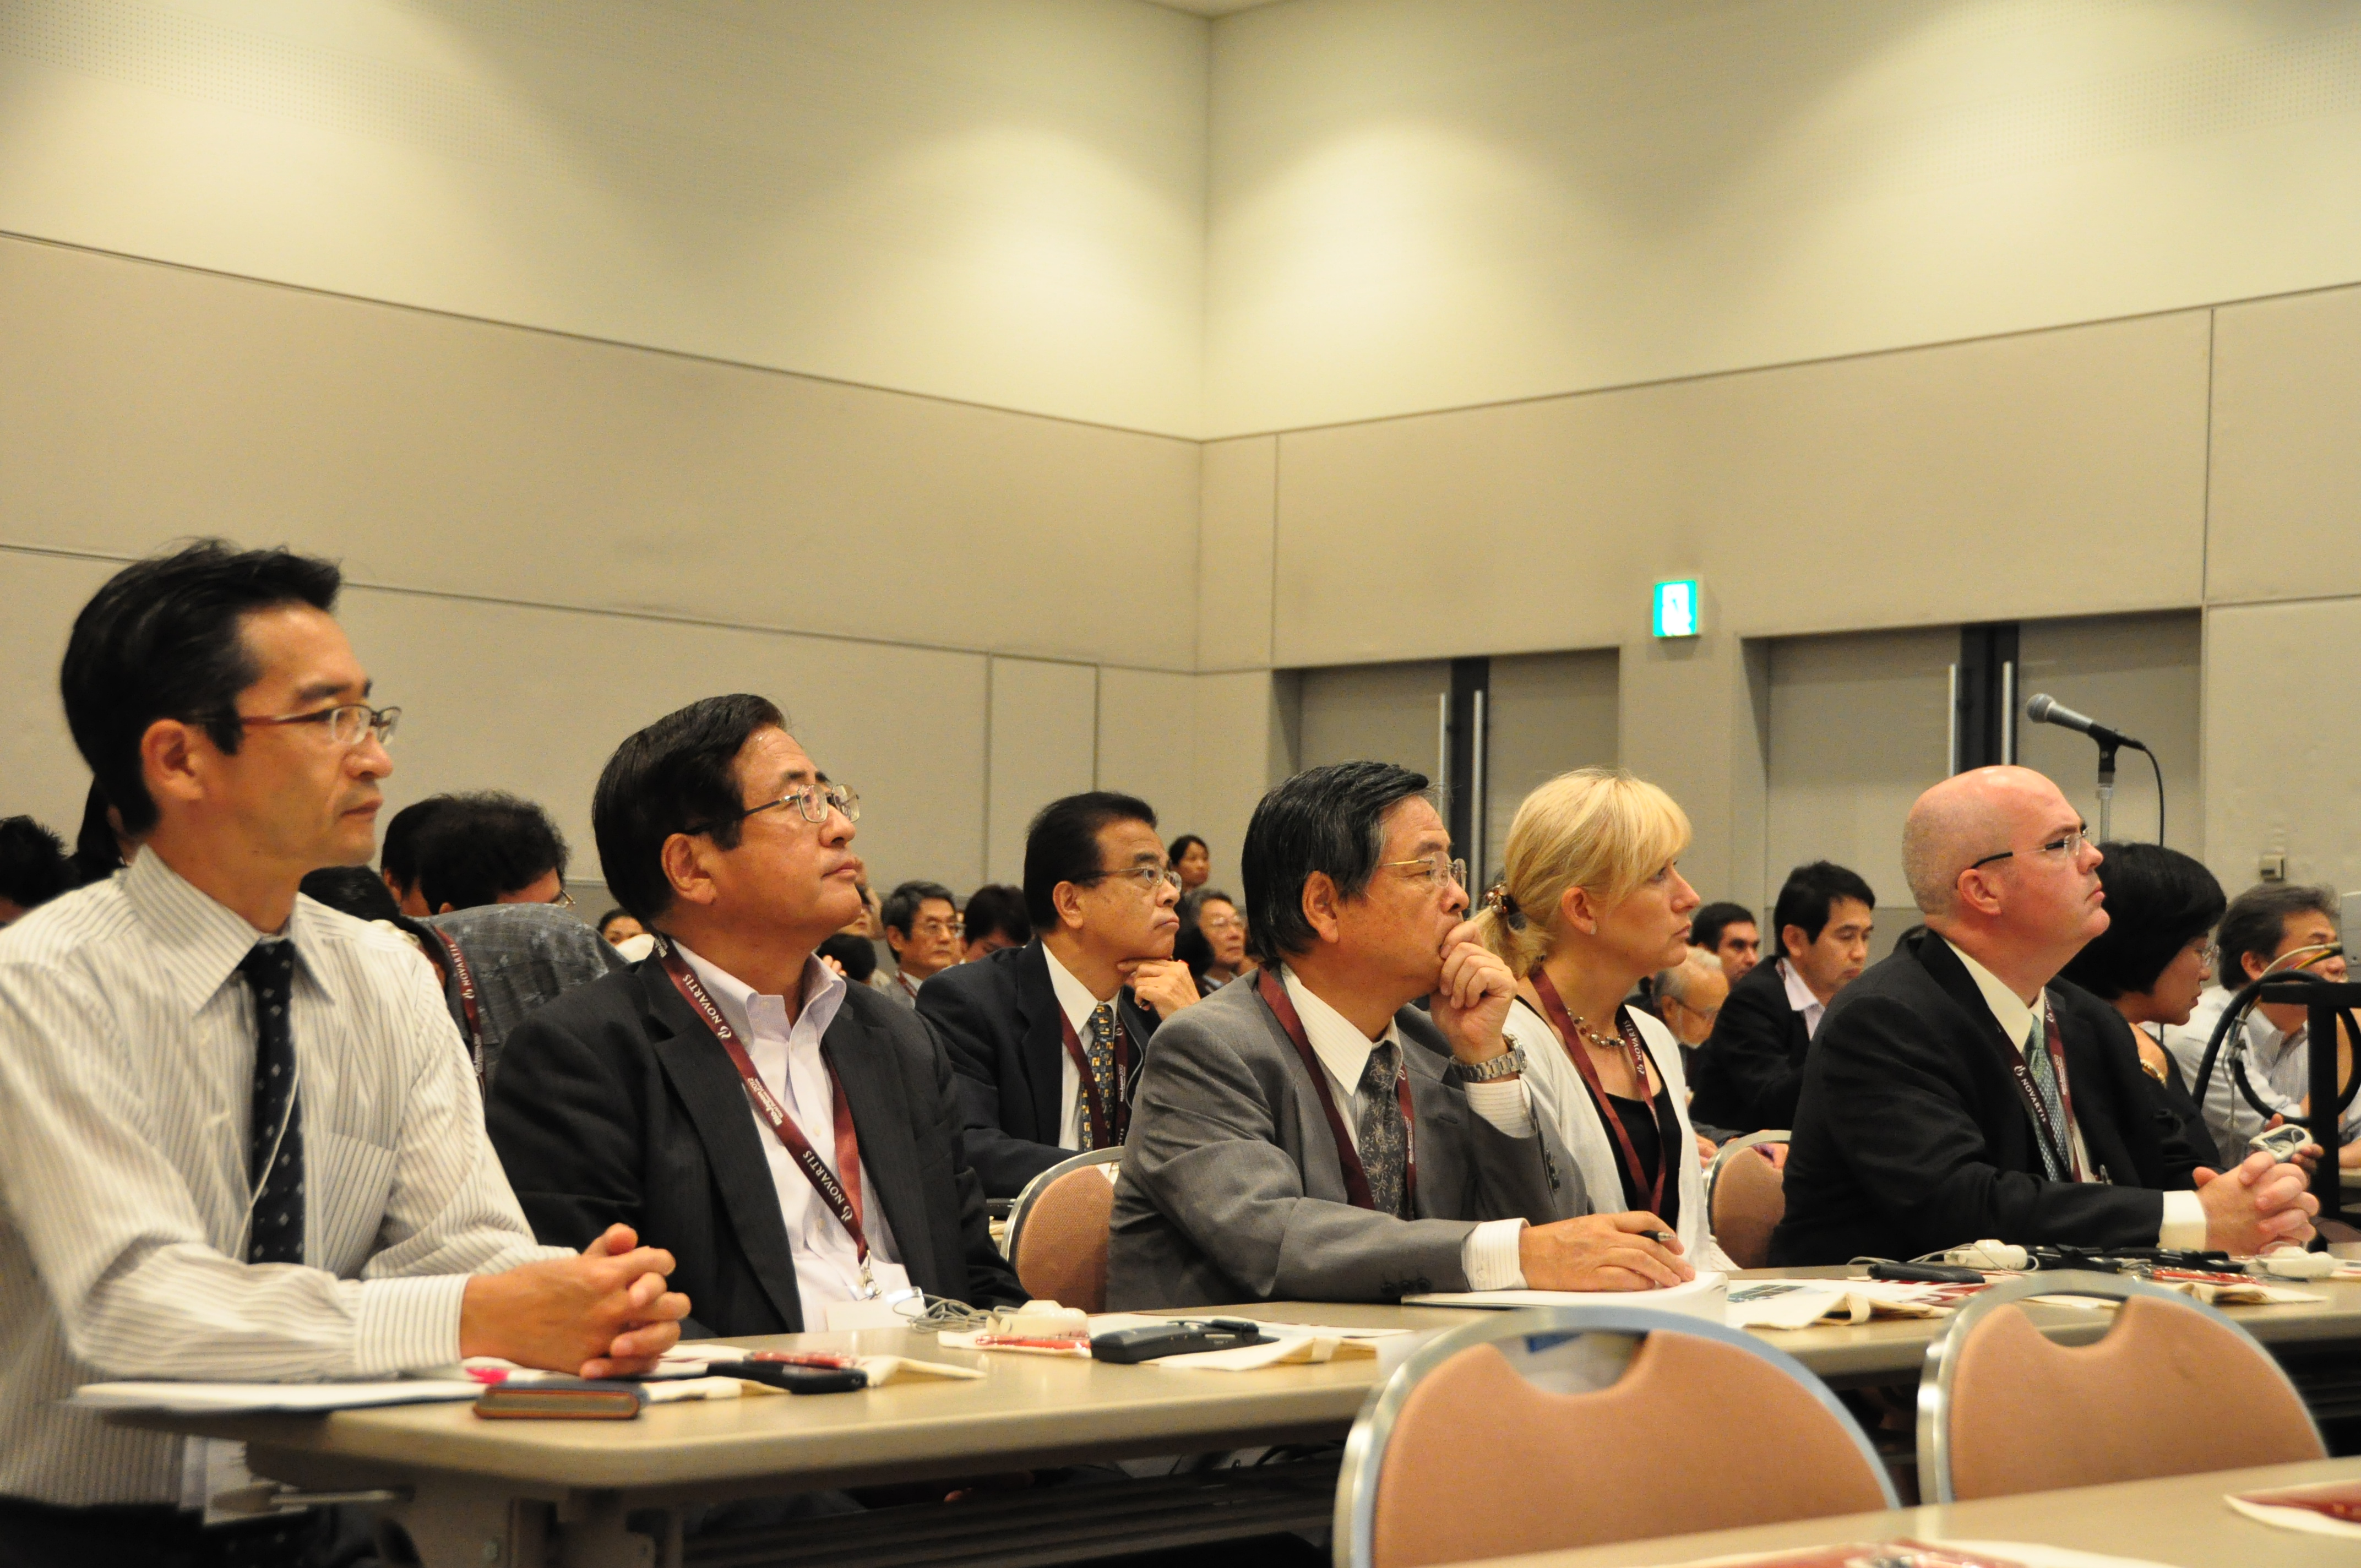 About 120 people came to the OIST seminars at BioJapan2012